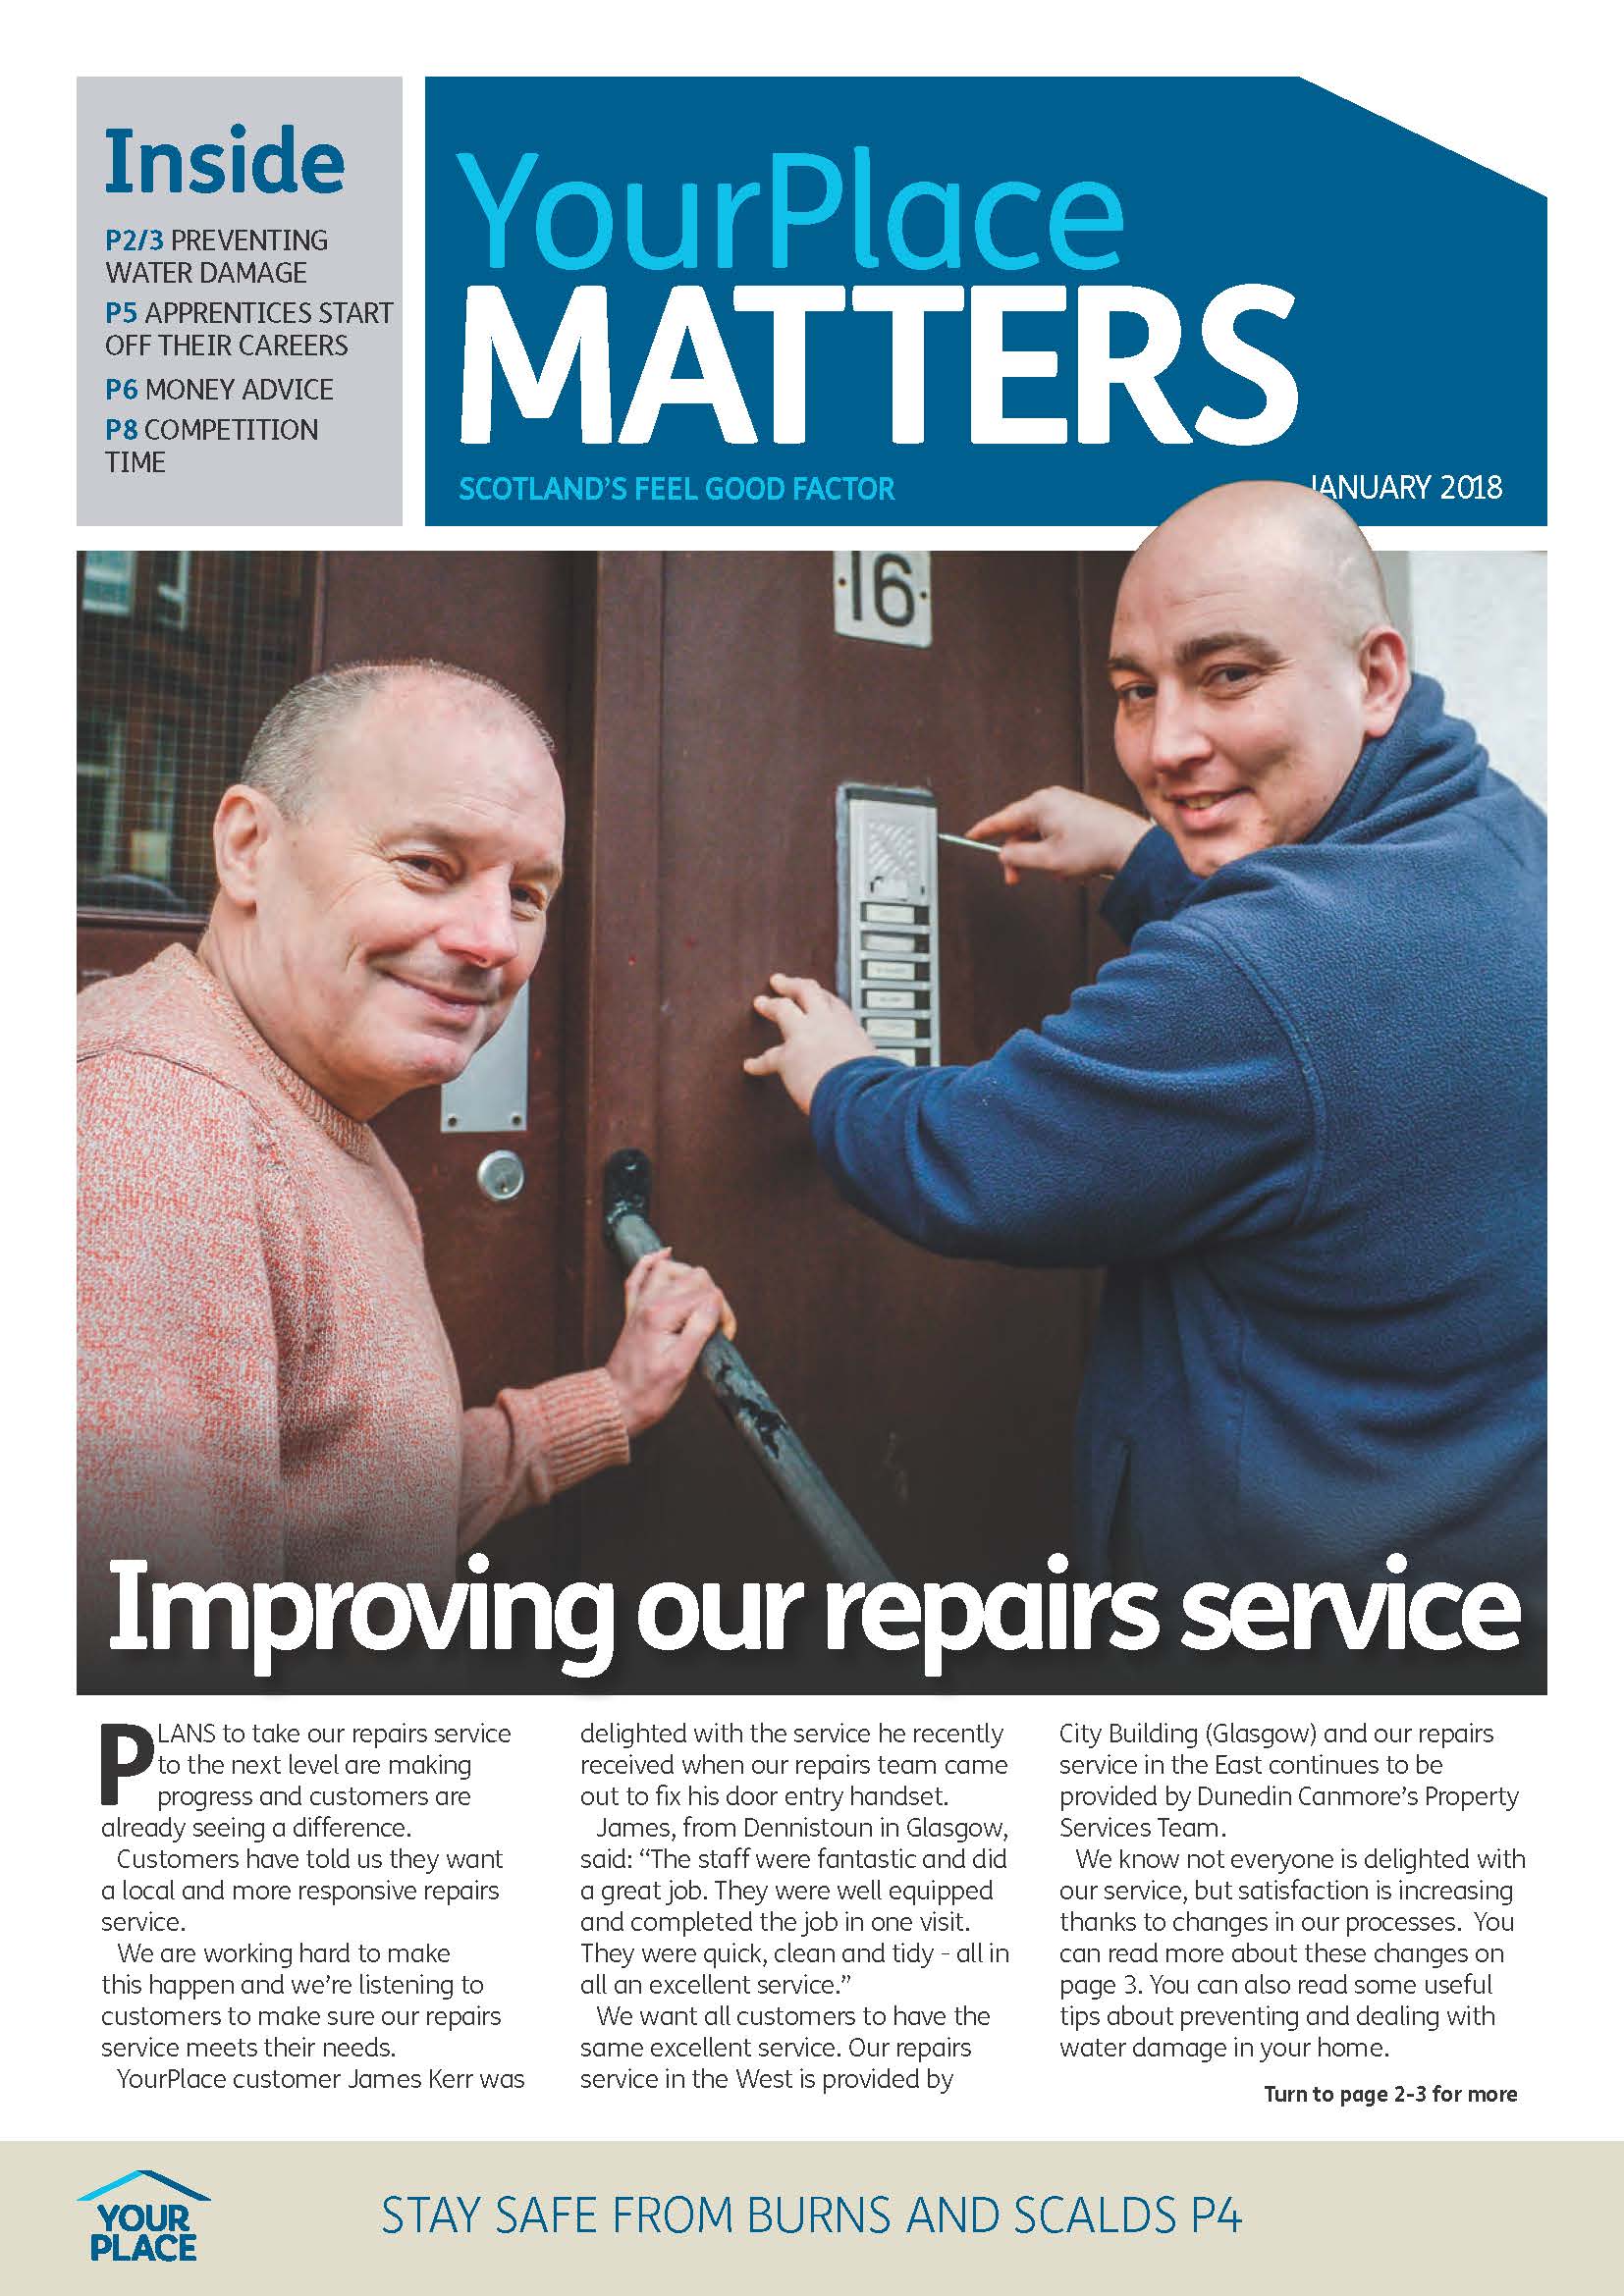 YourPlace Matters Jan 18 front cover